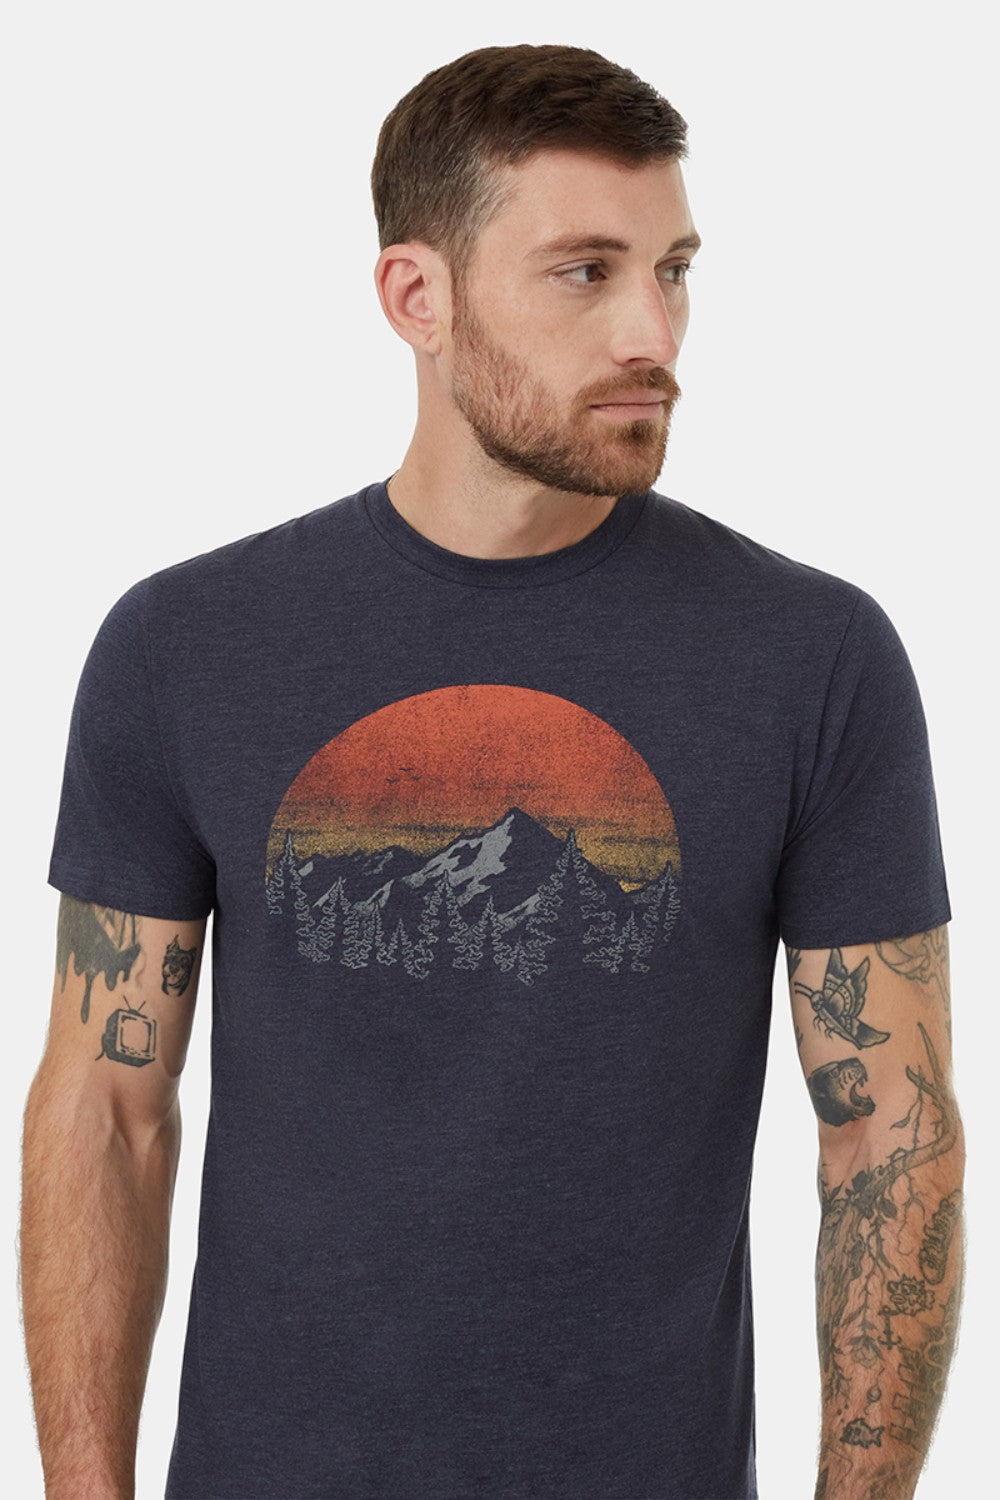 On the hunt for sustainable, vintage vibes? This sunset t-shirt features a throwback graphic — and feels so soft you'll swear it's already broken in.